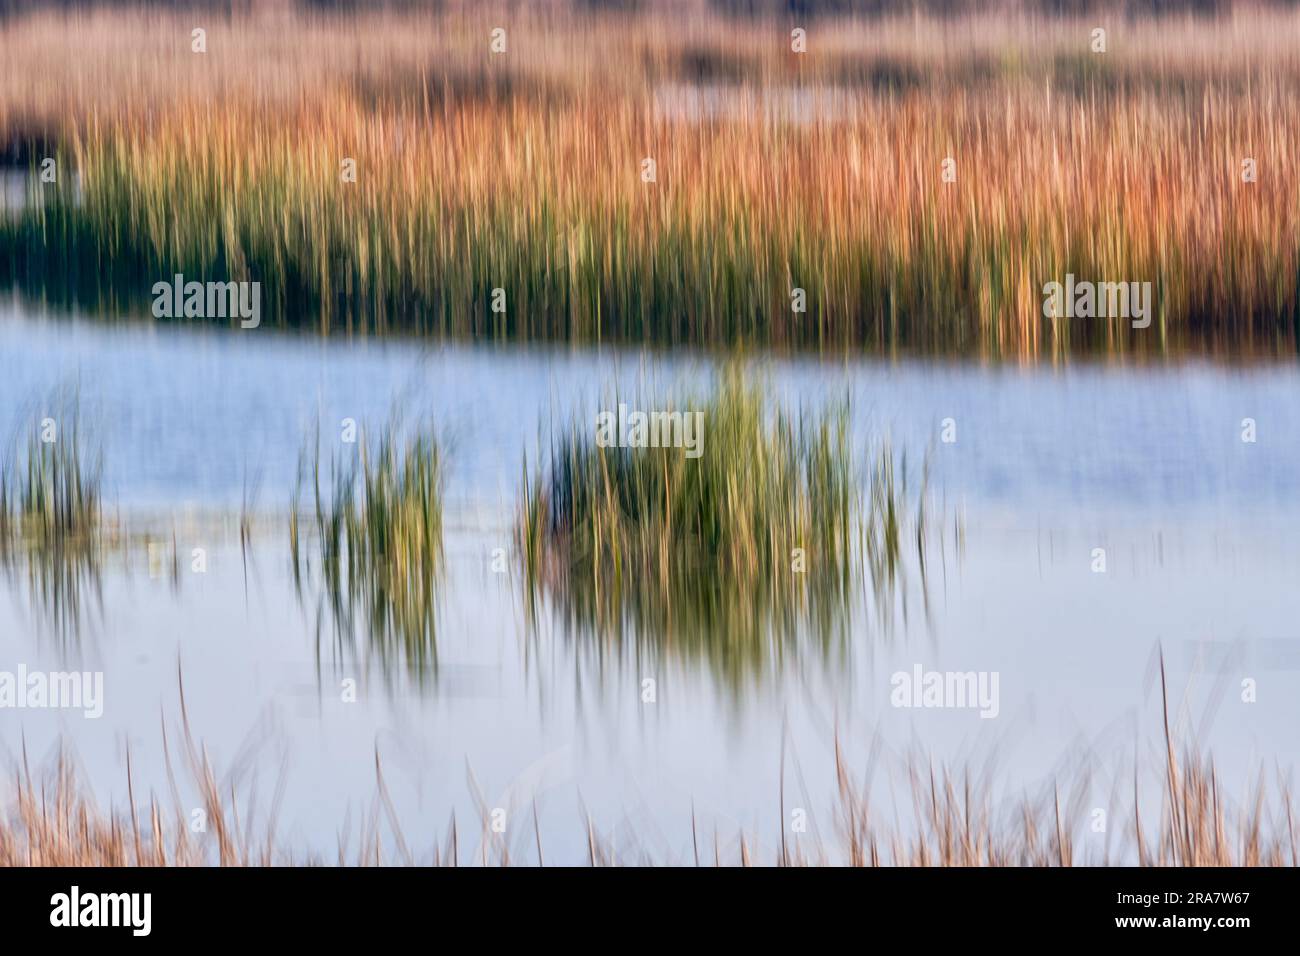 Abstract - ICM (Intentional Camera Movement) creates streaks of gold and green from reeds around a blue lake. Stock Photo